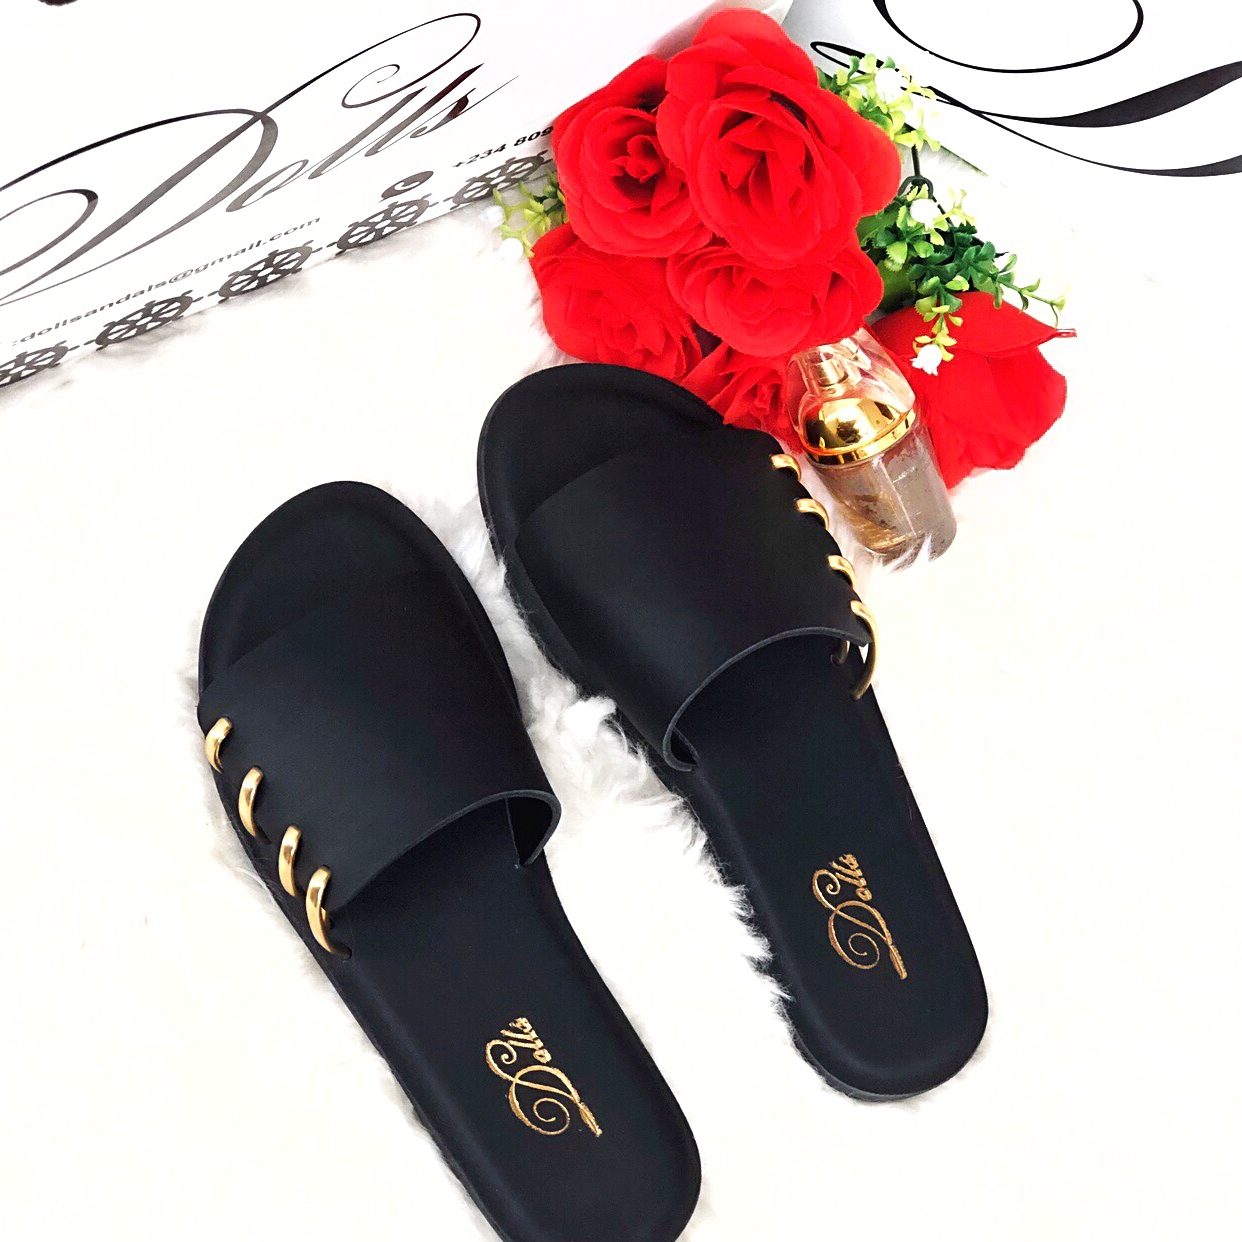 picture of a sandals by Dolls leather products